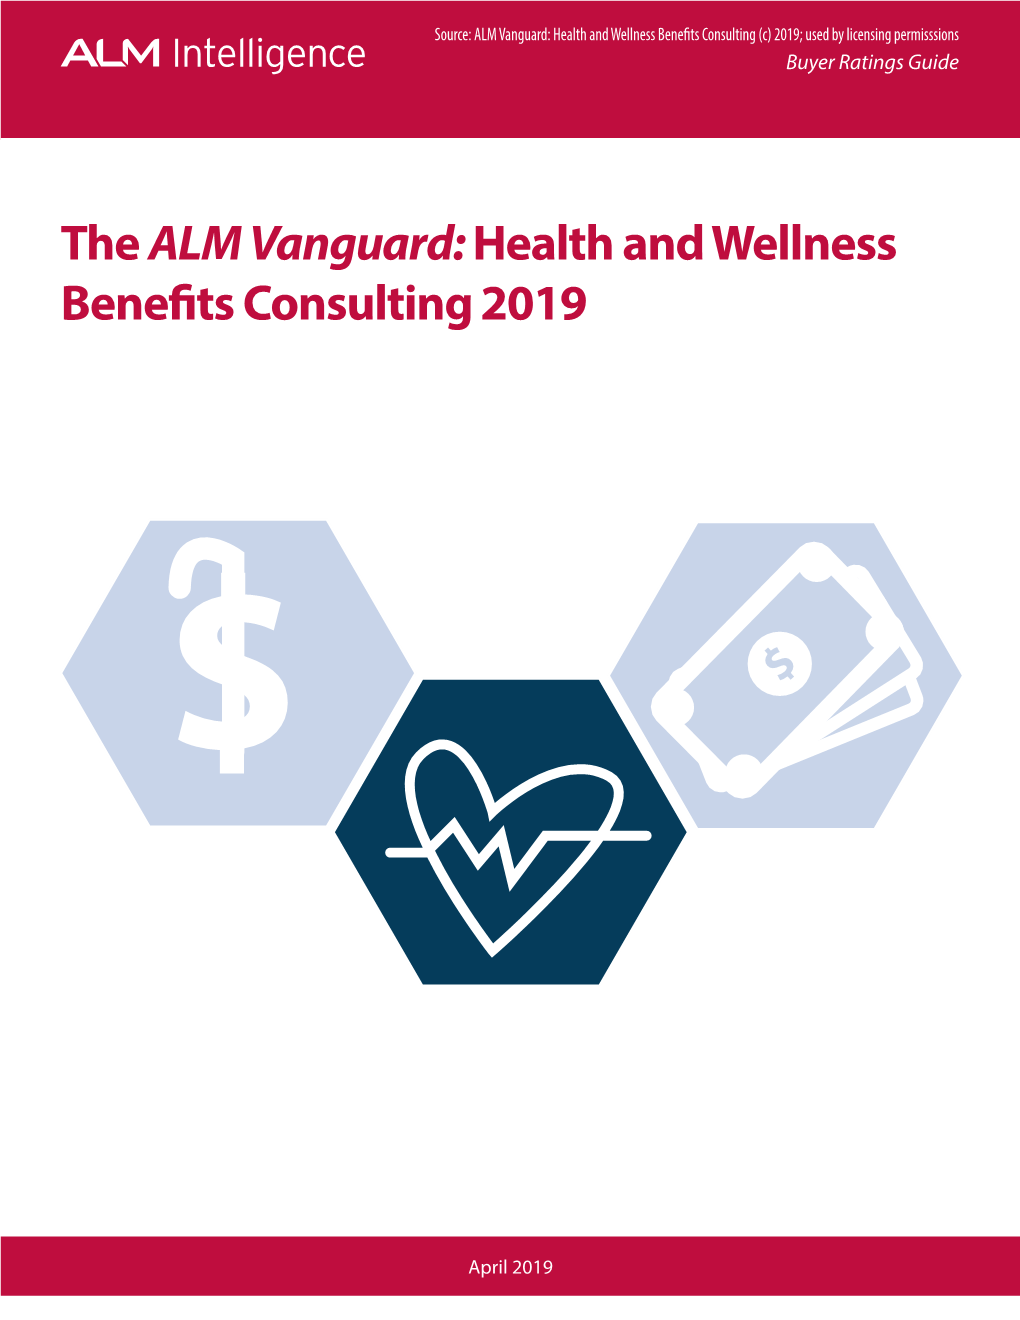 The ALM Vanguard: Health and Wellness Benefits Consulting2019